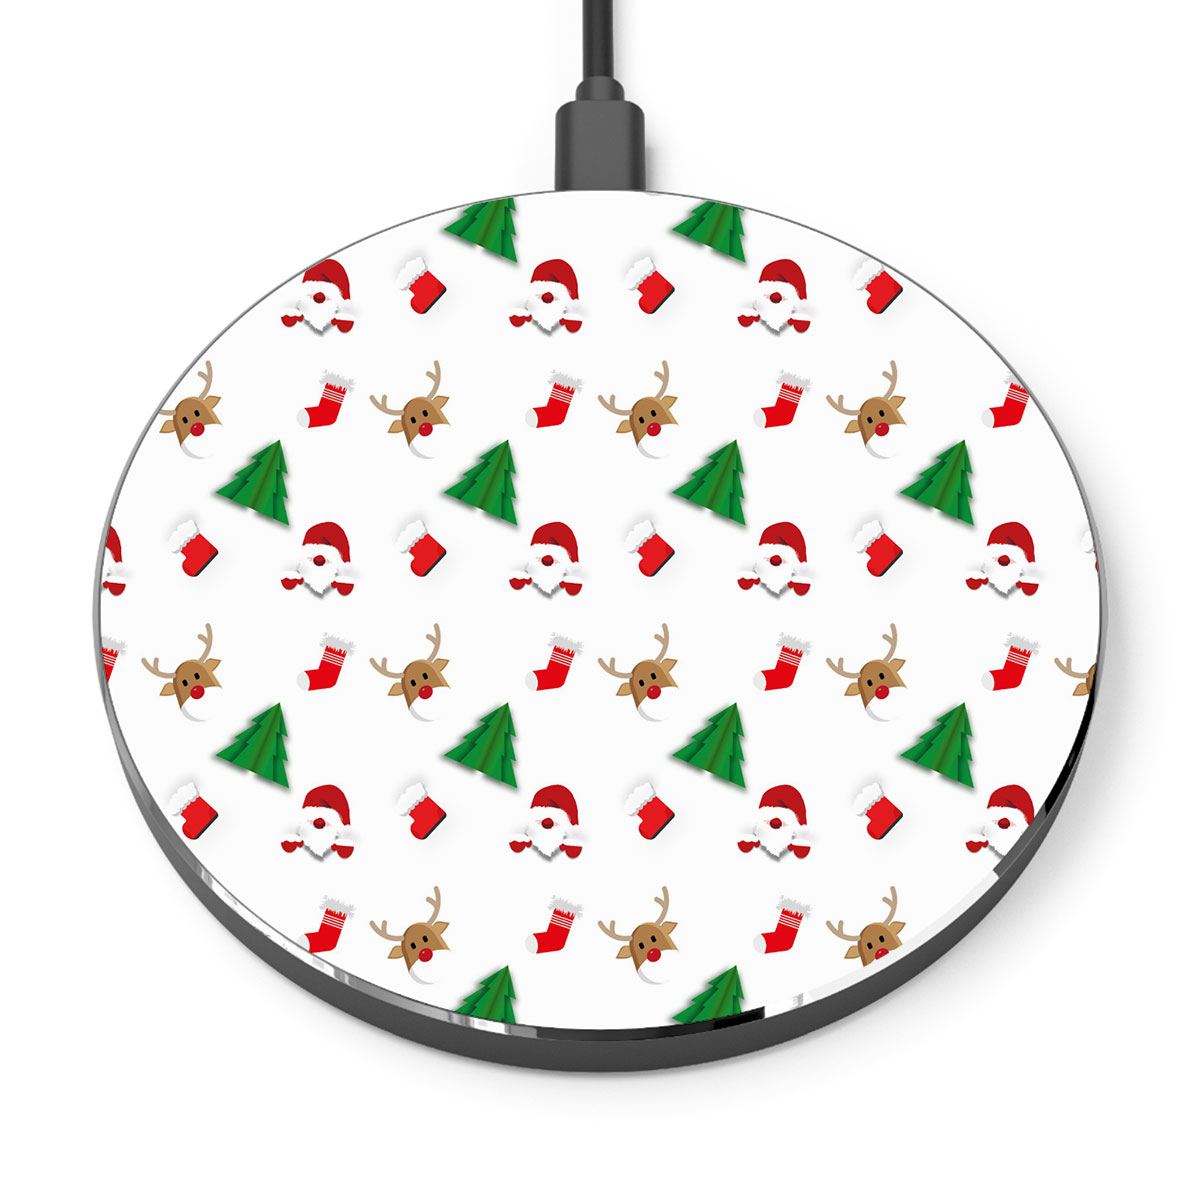 Santa Claus, Pine Tree Silhouette, Christmas Reindeer And Red Socks Seamless Pattern Printed Wireless Charger